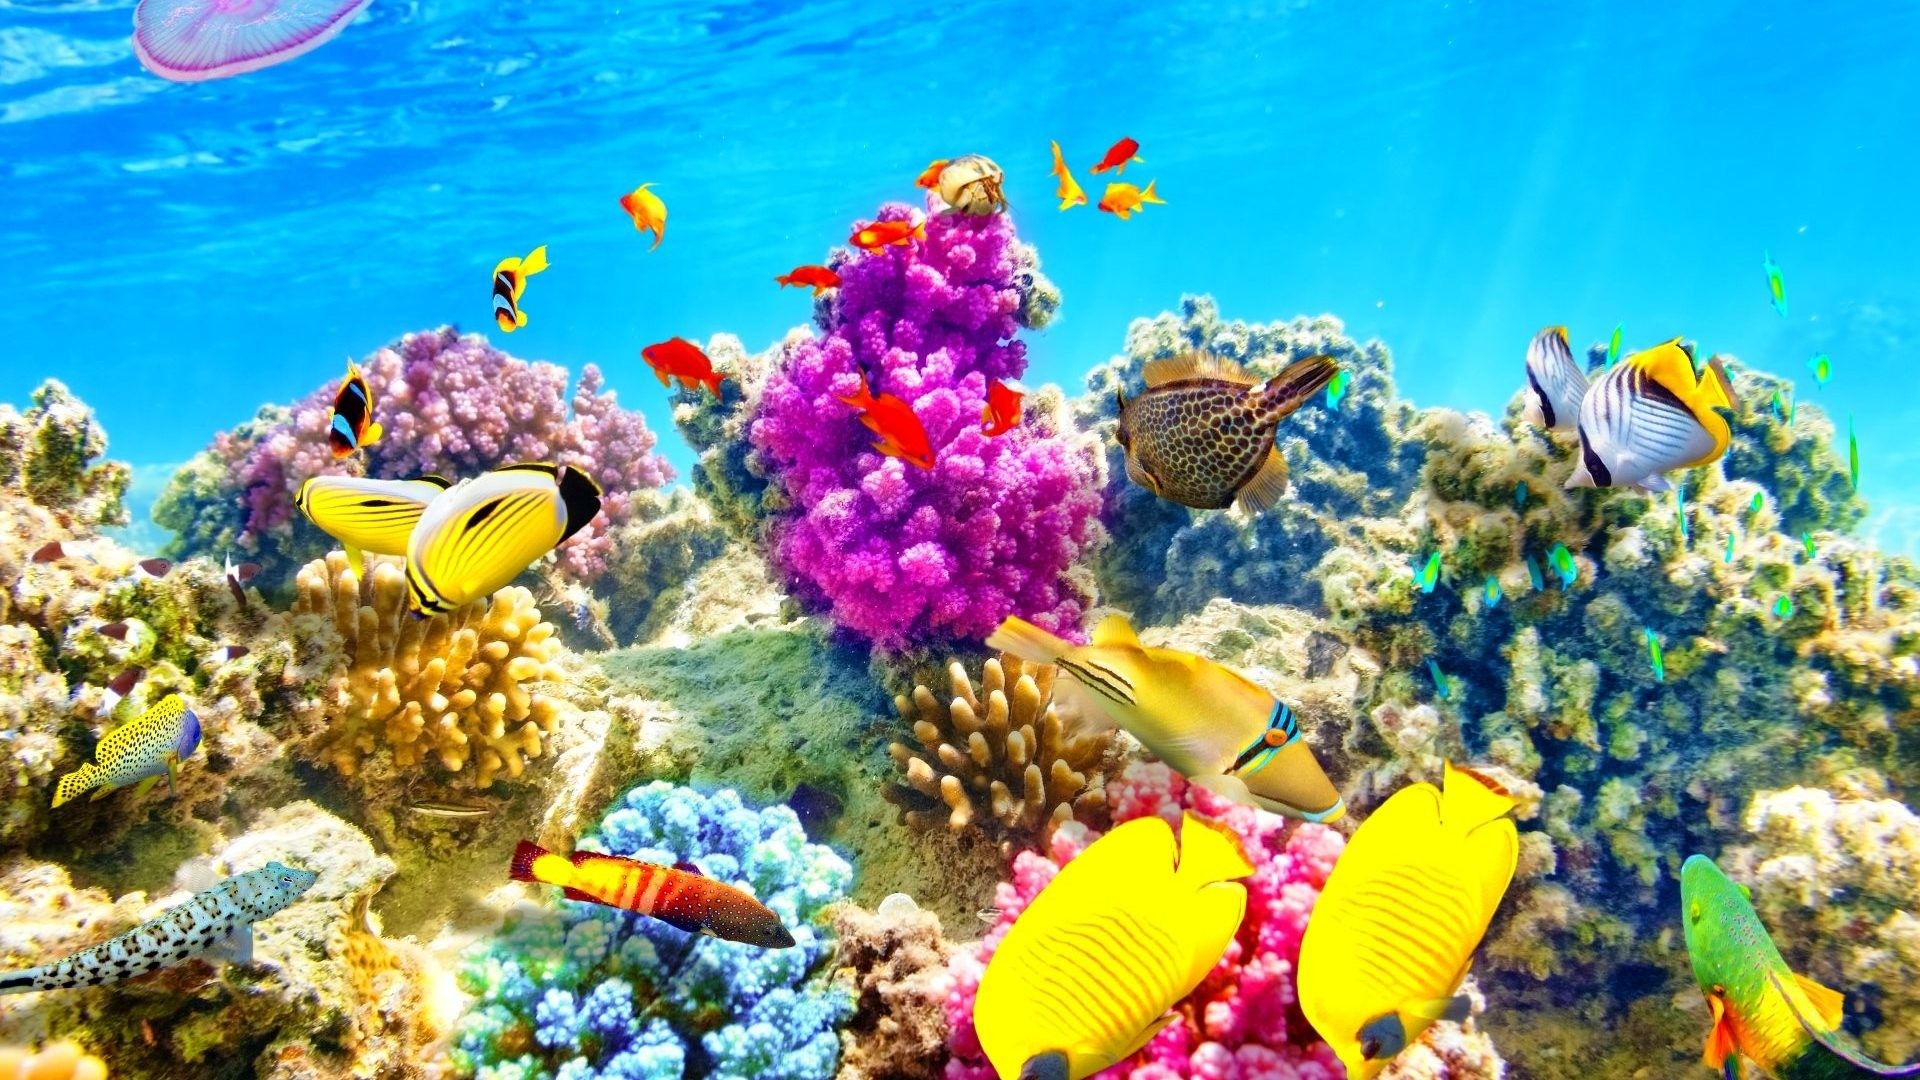 1920x1080 Sealife Tag - Sealife Underwater Fishes Nature Fish Sea Ocean Desktop  Backgrounds Tropical for HD 16